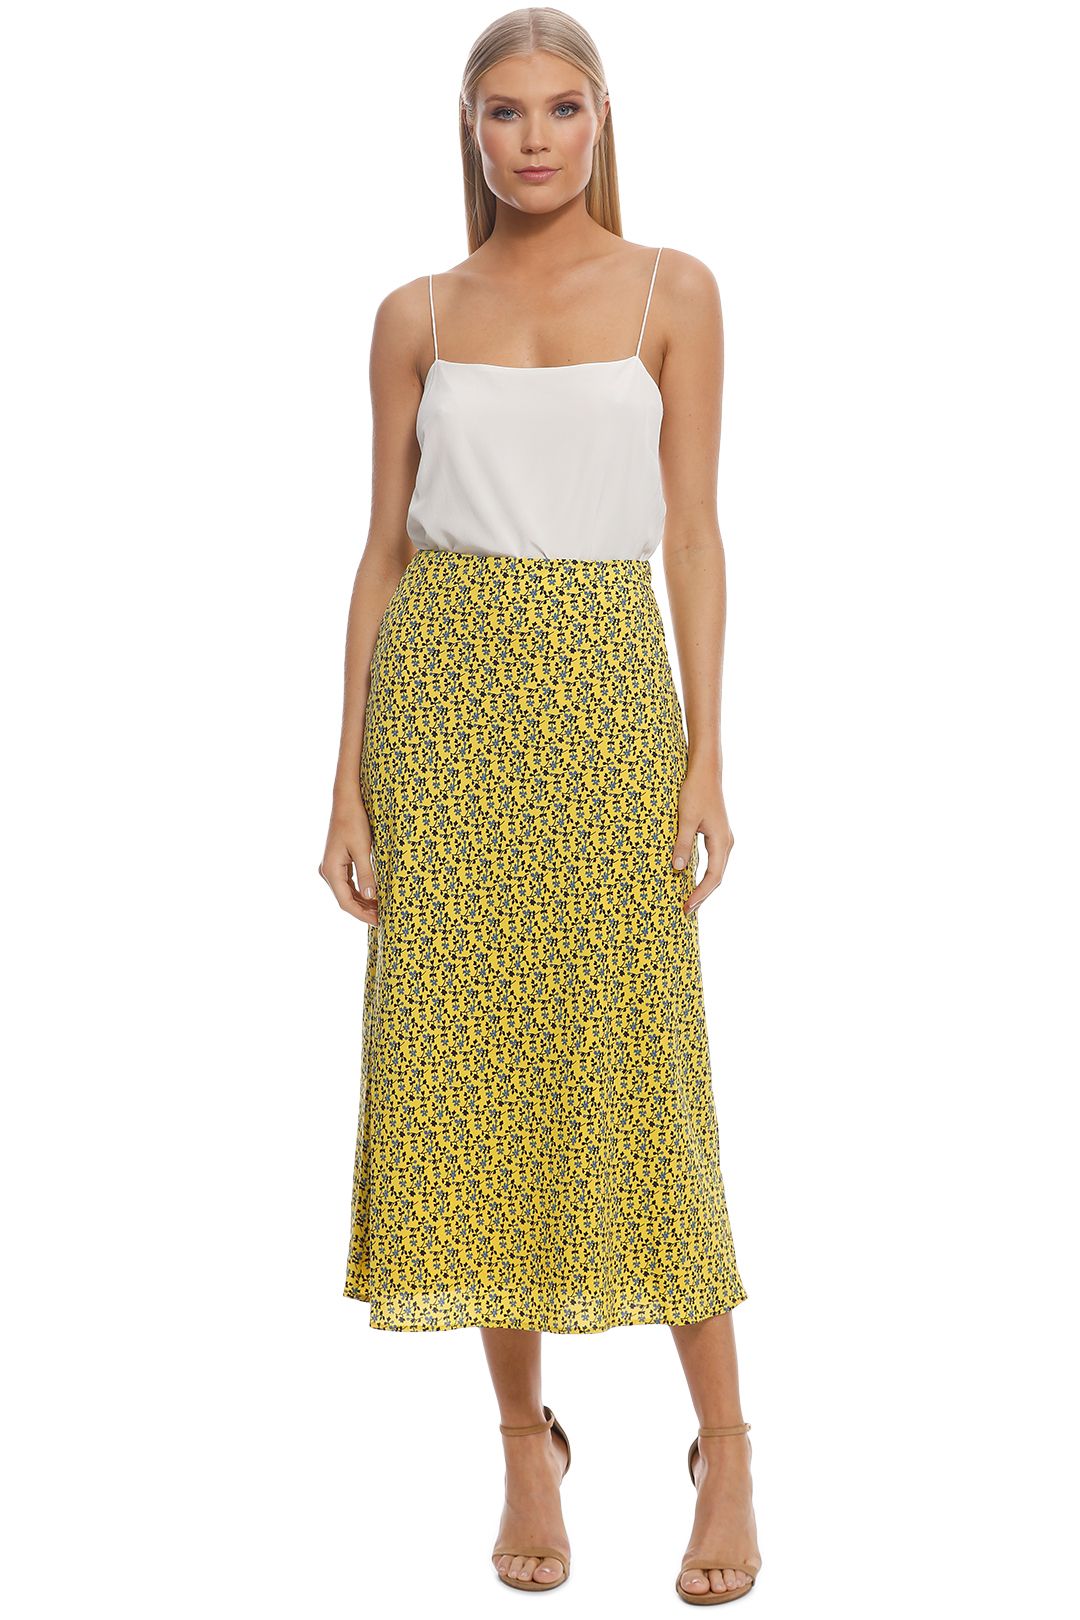 Sanguine Skirt in Yellow Floral by C/MEO Collective for Rent | GlamCorner